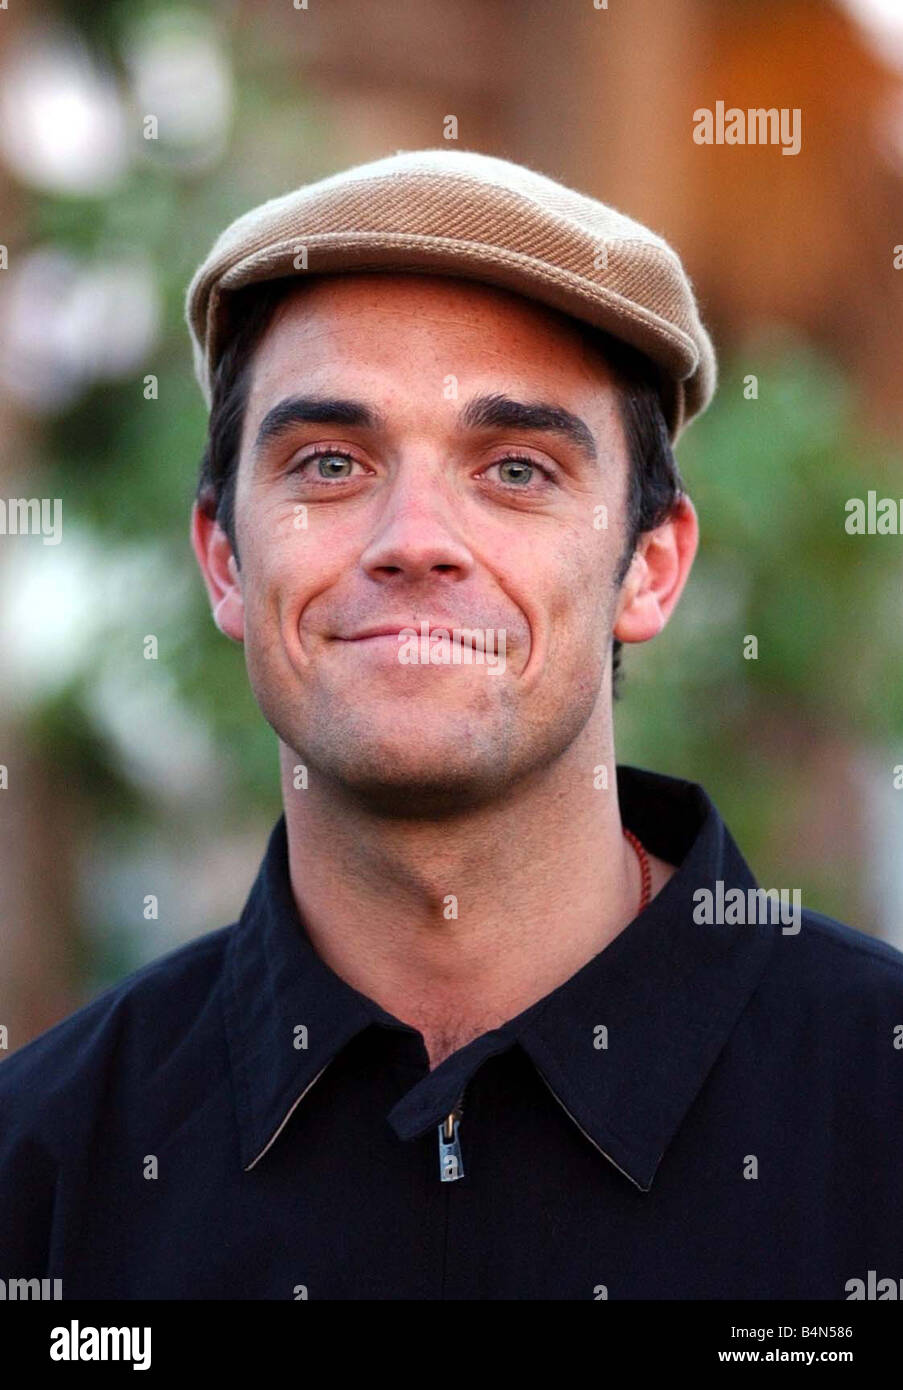 Robbie Williams April 2002 pictured at the Coachella Music festival in Palm Springs California Robbie Williams made a surprise appearance not performing cap hat Stock Photo